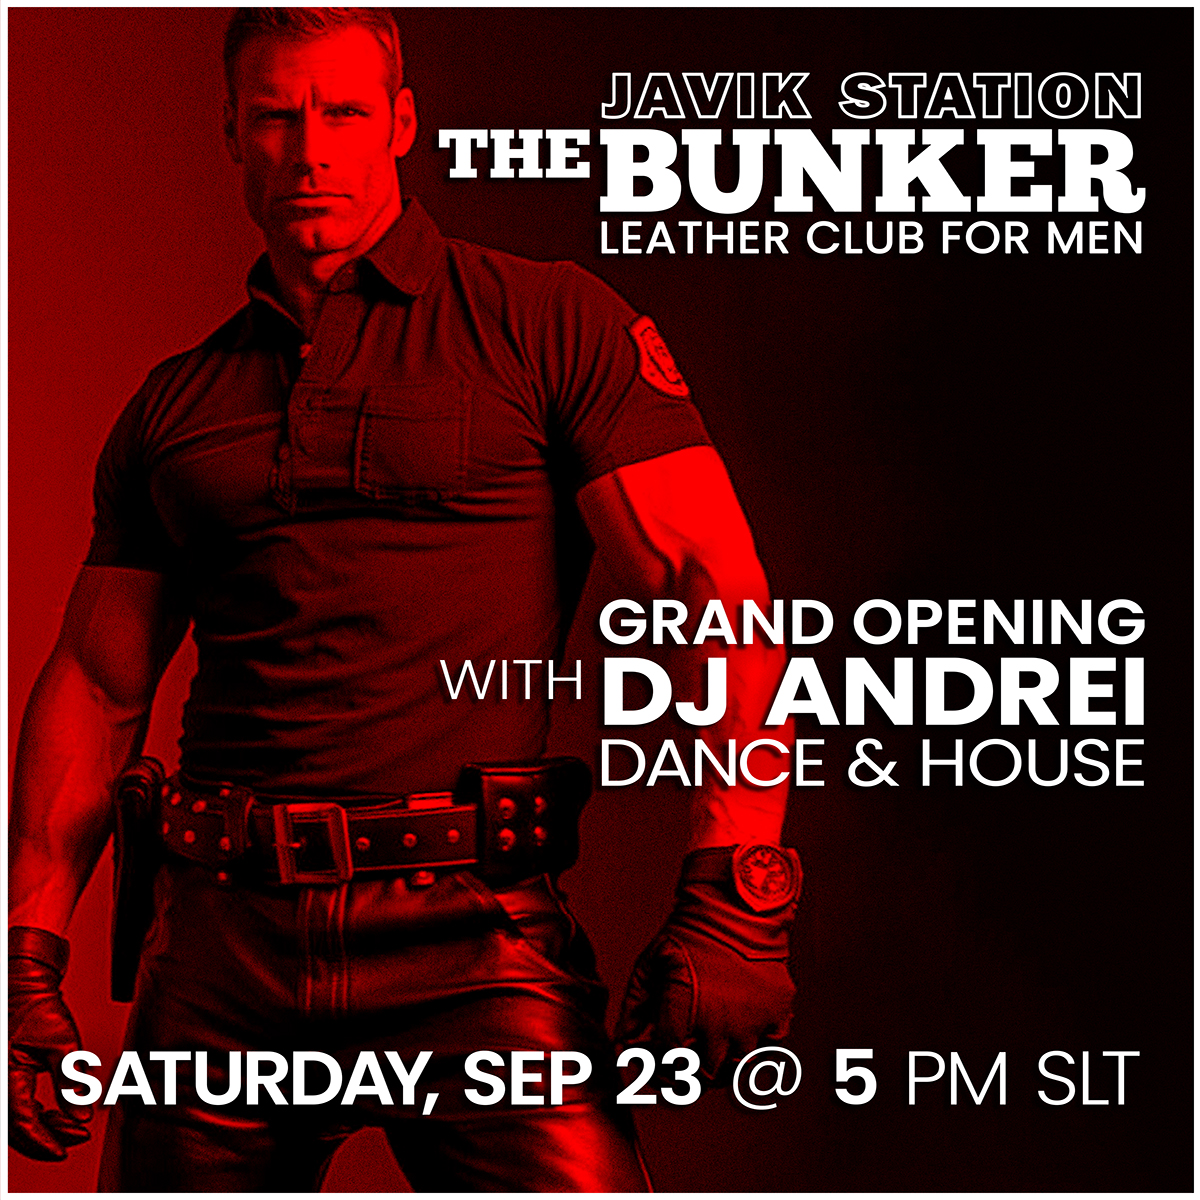 GRAND OPENING – THE BUNKER LEATHER CLUB @ JAVIK STATION!